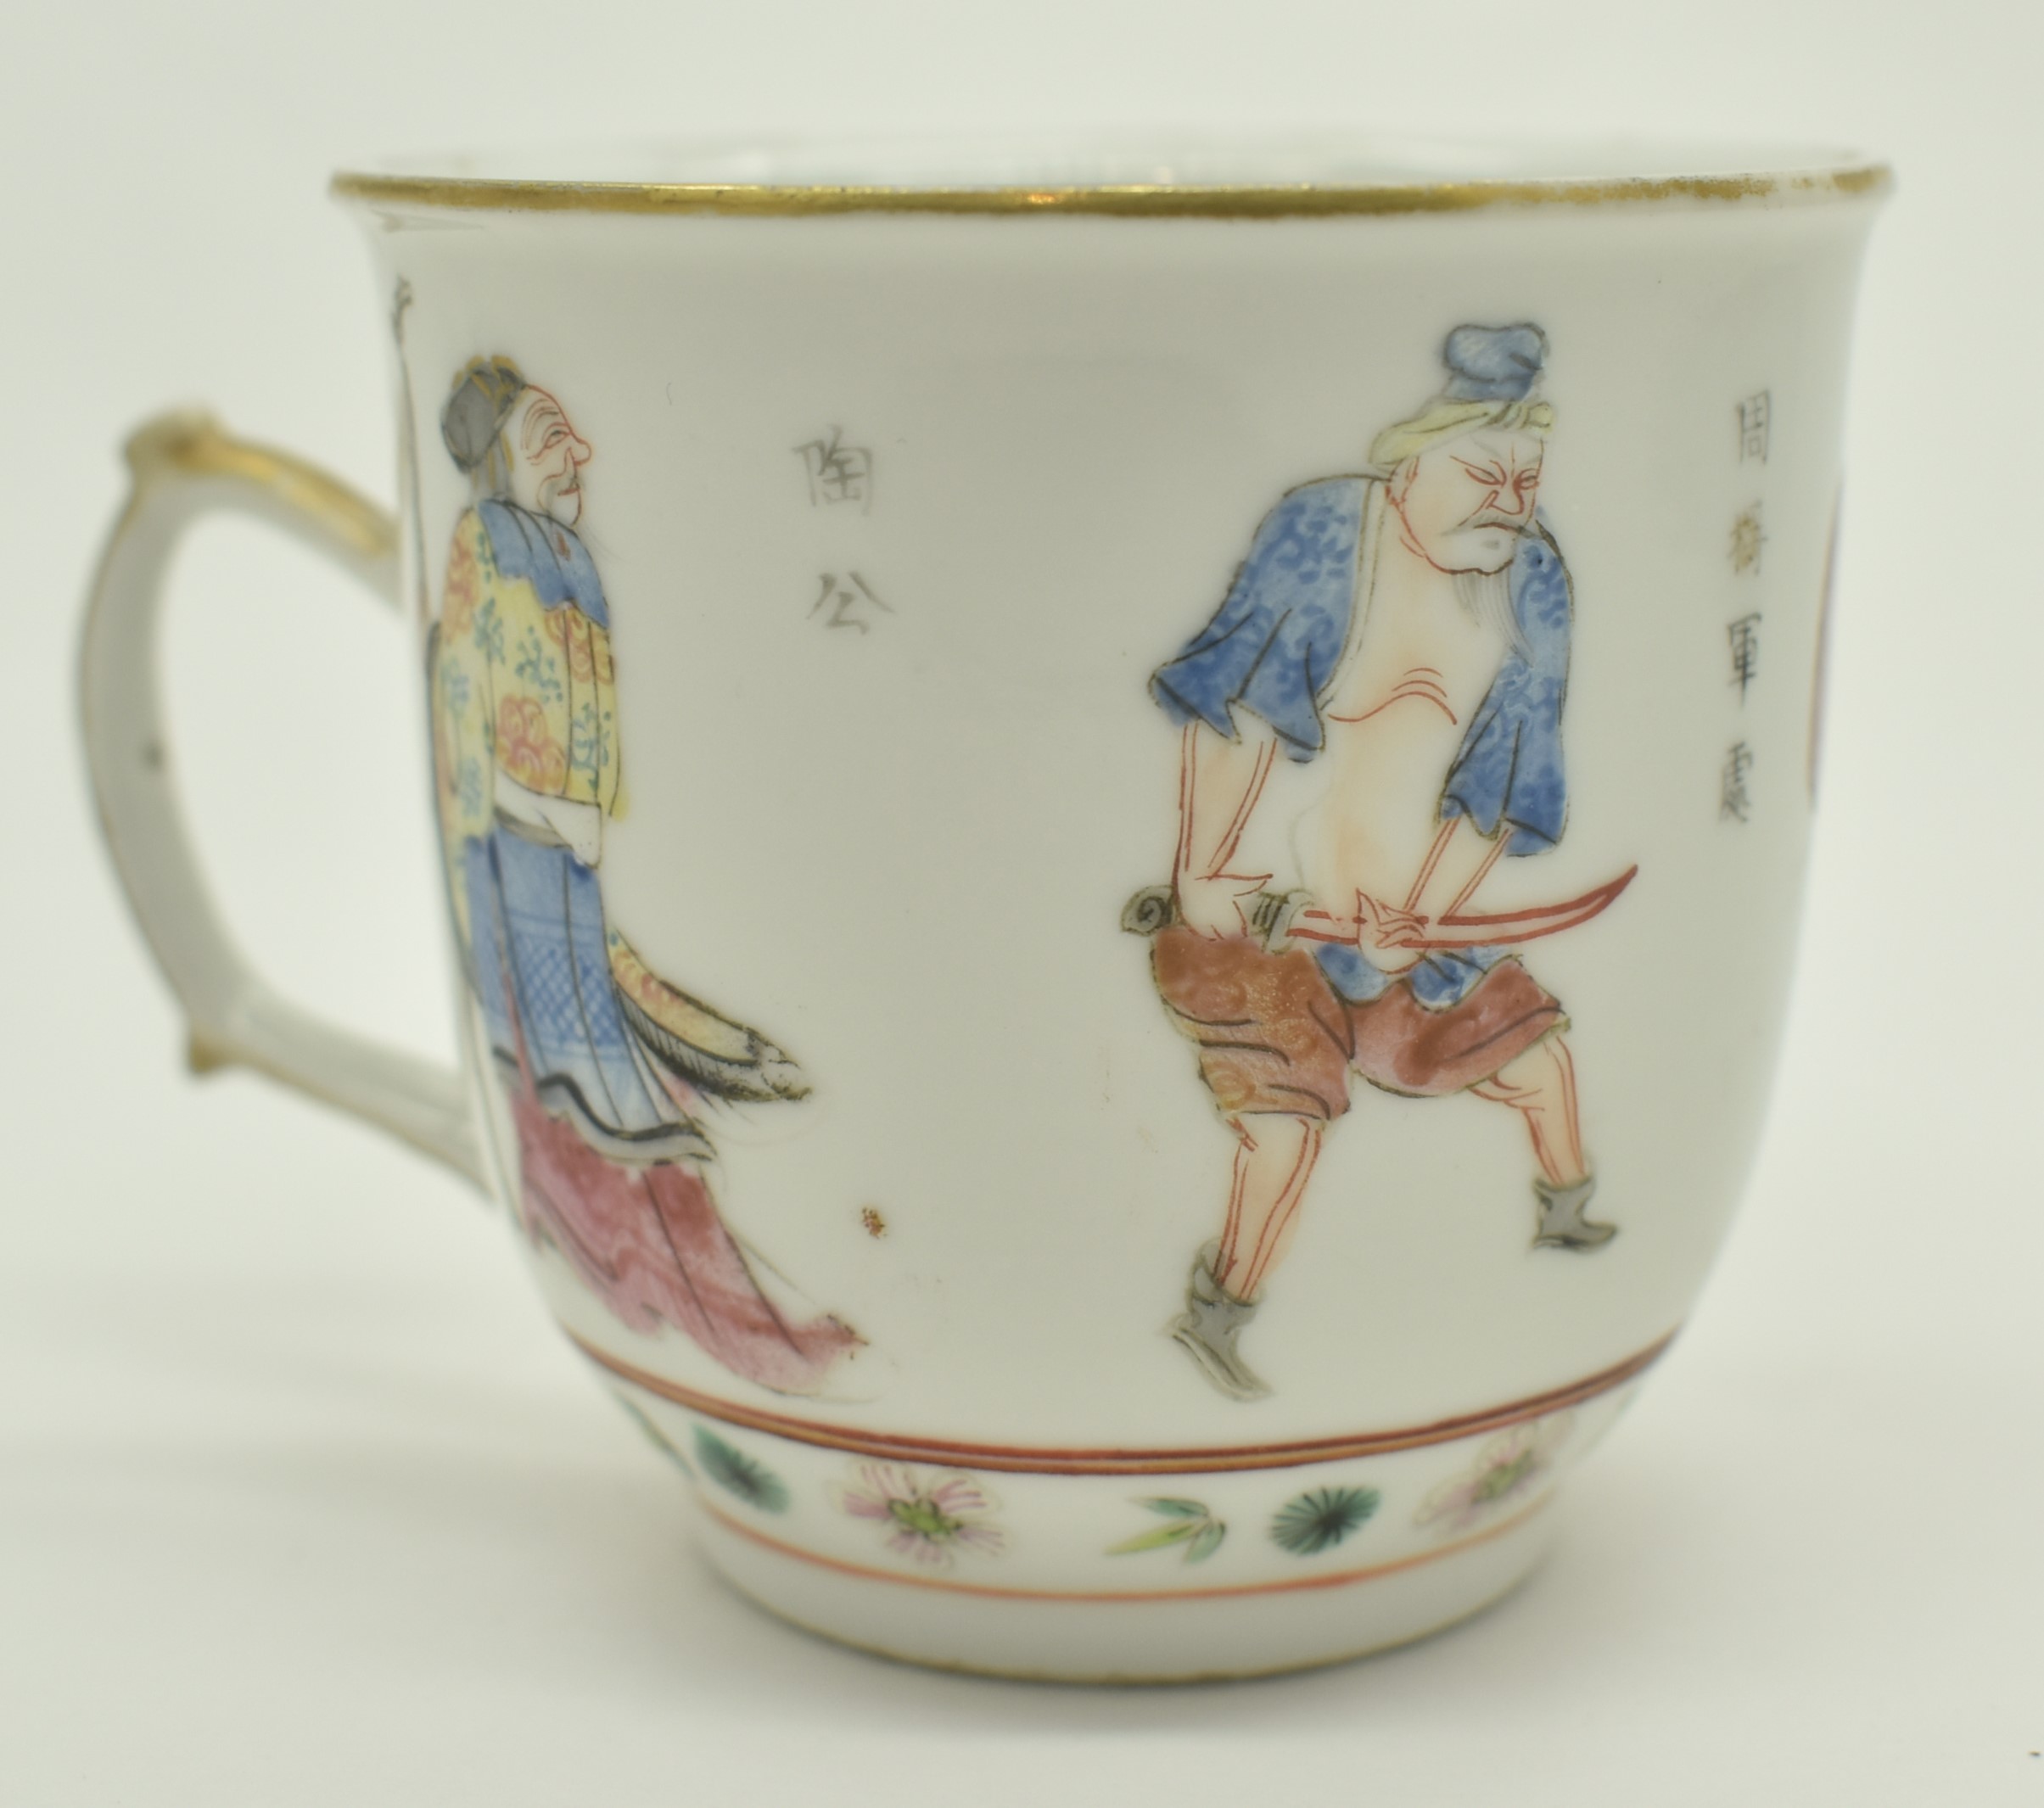 FAMILLE ROSE WU SHUANG PU CUP WITH HANDLE 道光粉彩无双谱人物杯 - Image 4 of 13